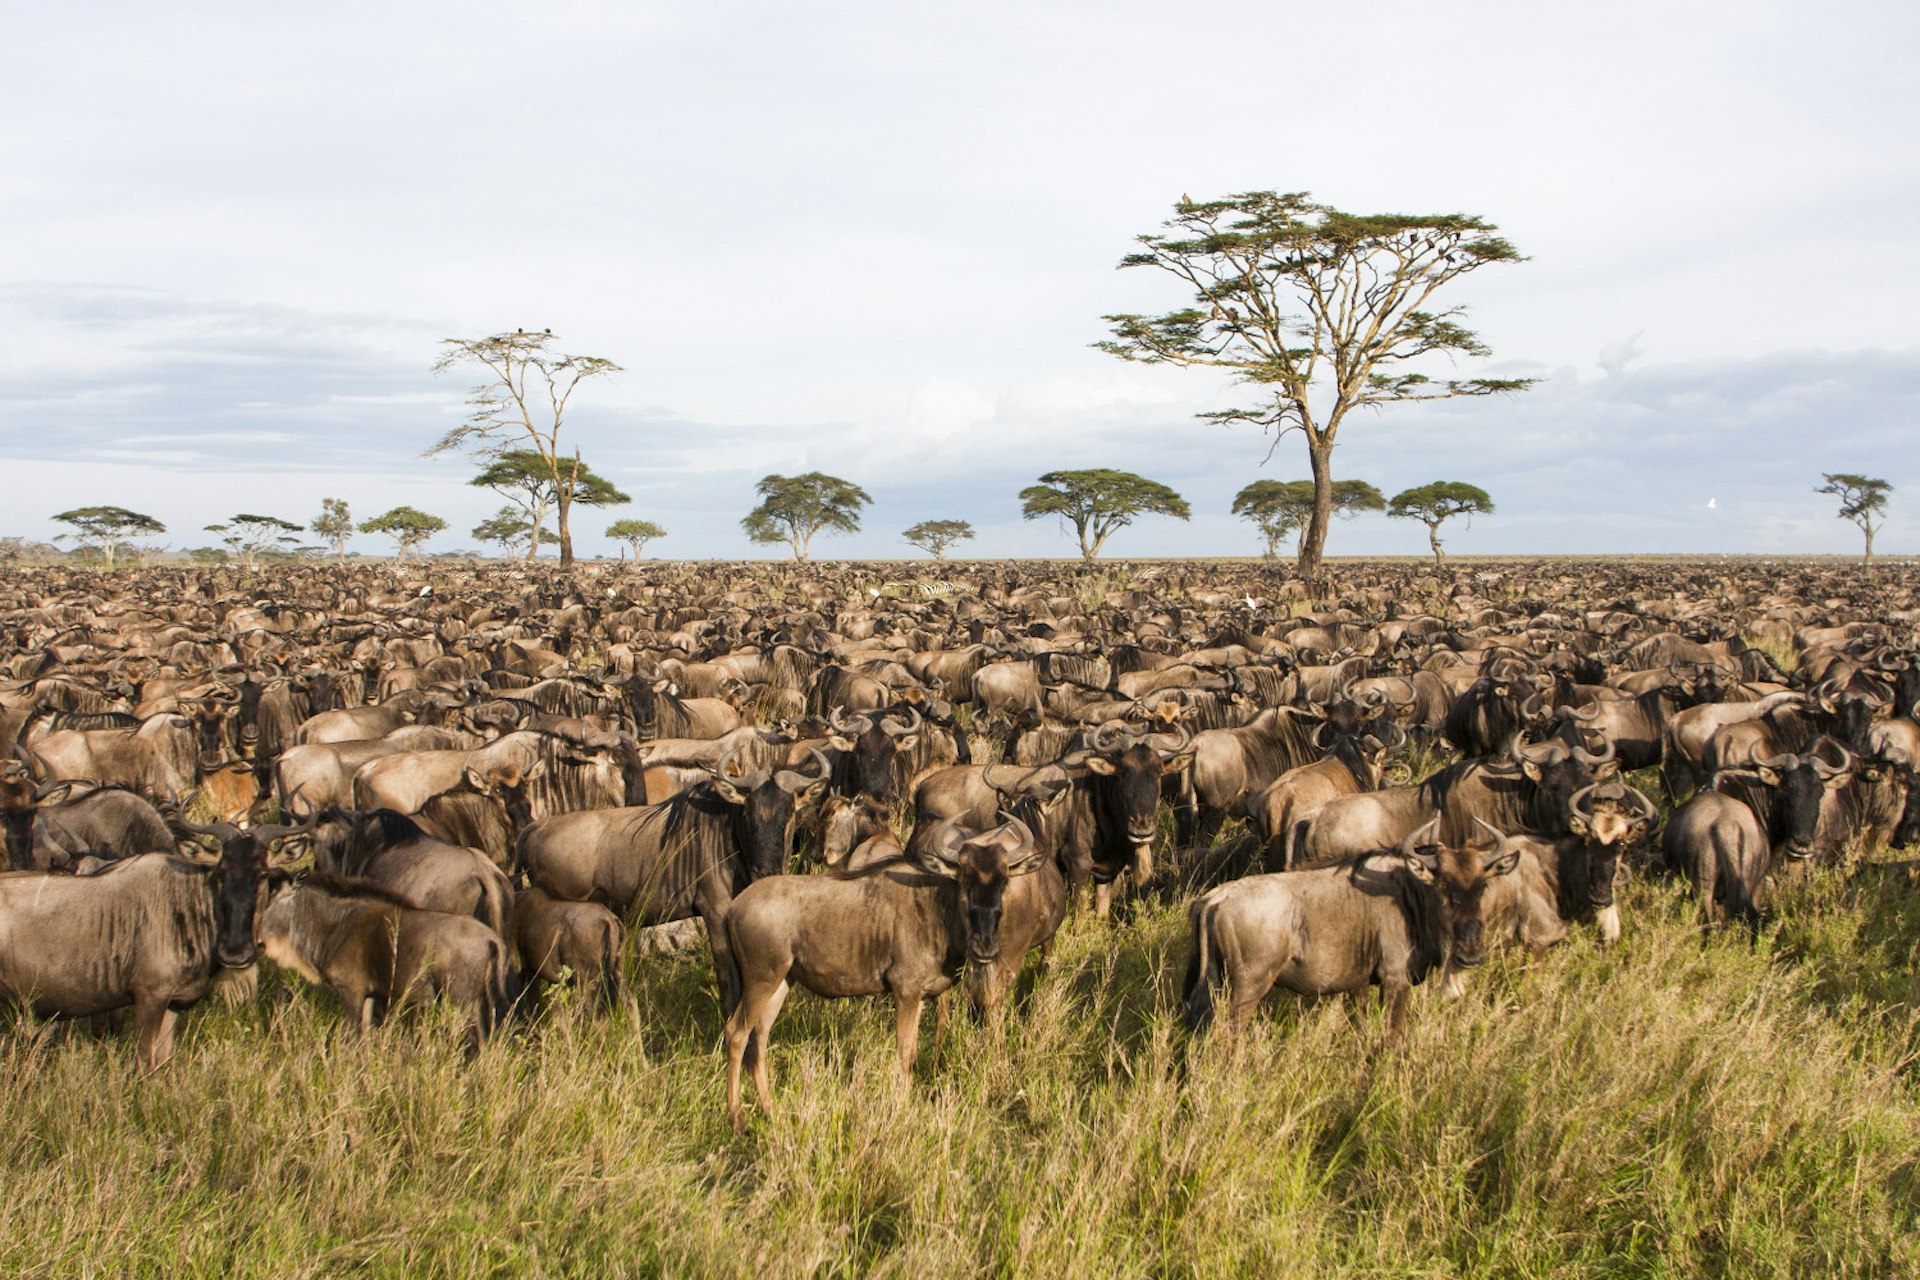 Annual migration of over one million Blue Wildebeest (Connochaetes taurinus) and 200, 000 zebras. Photographed in Spring April in Serengeti, Tanzania